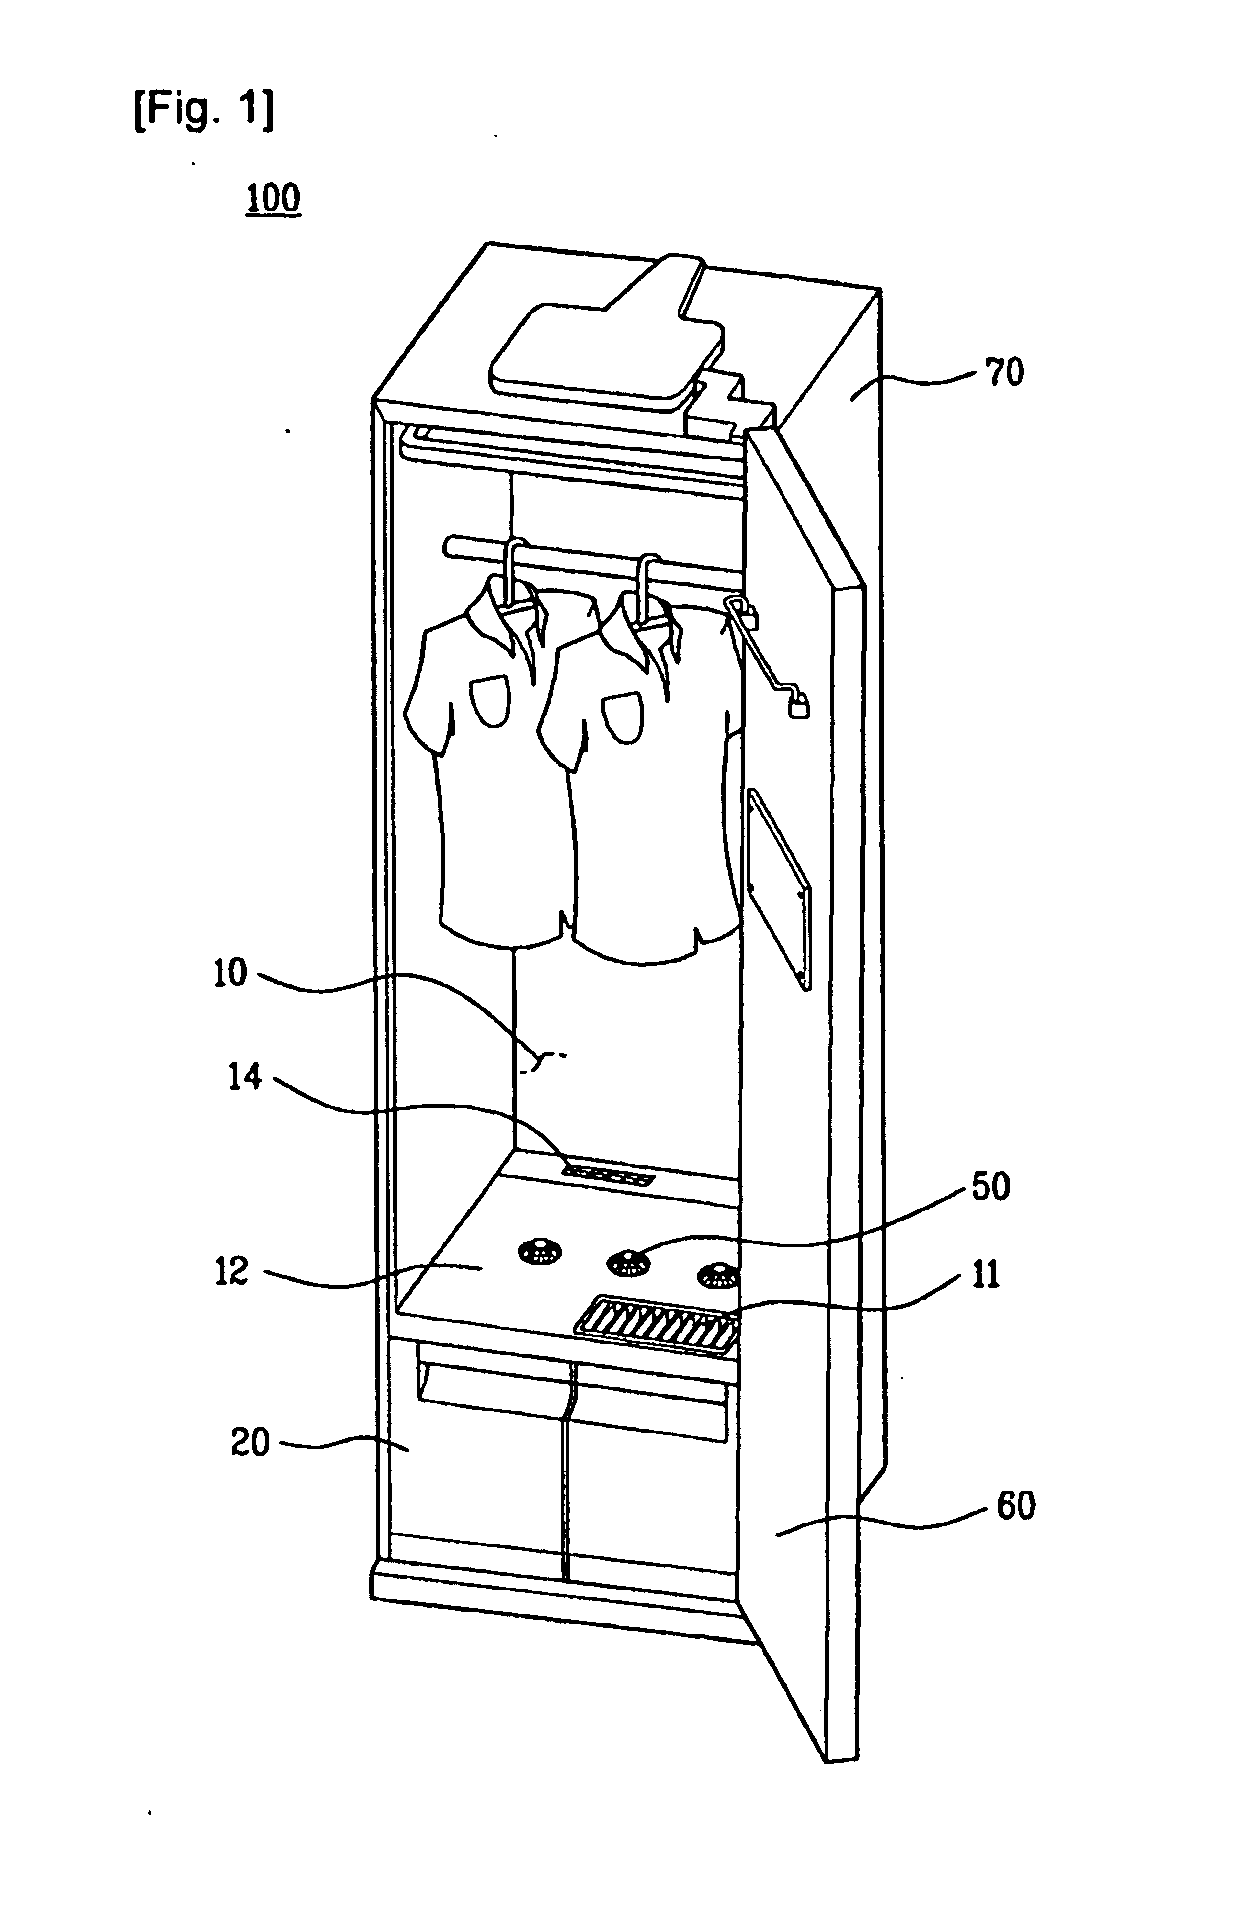 Controlling method of clothes treating apparatus